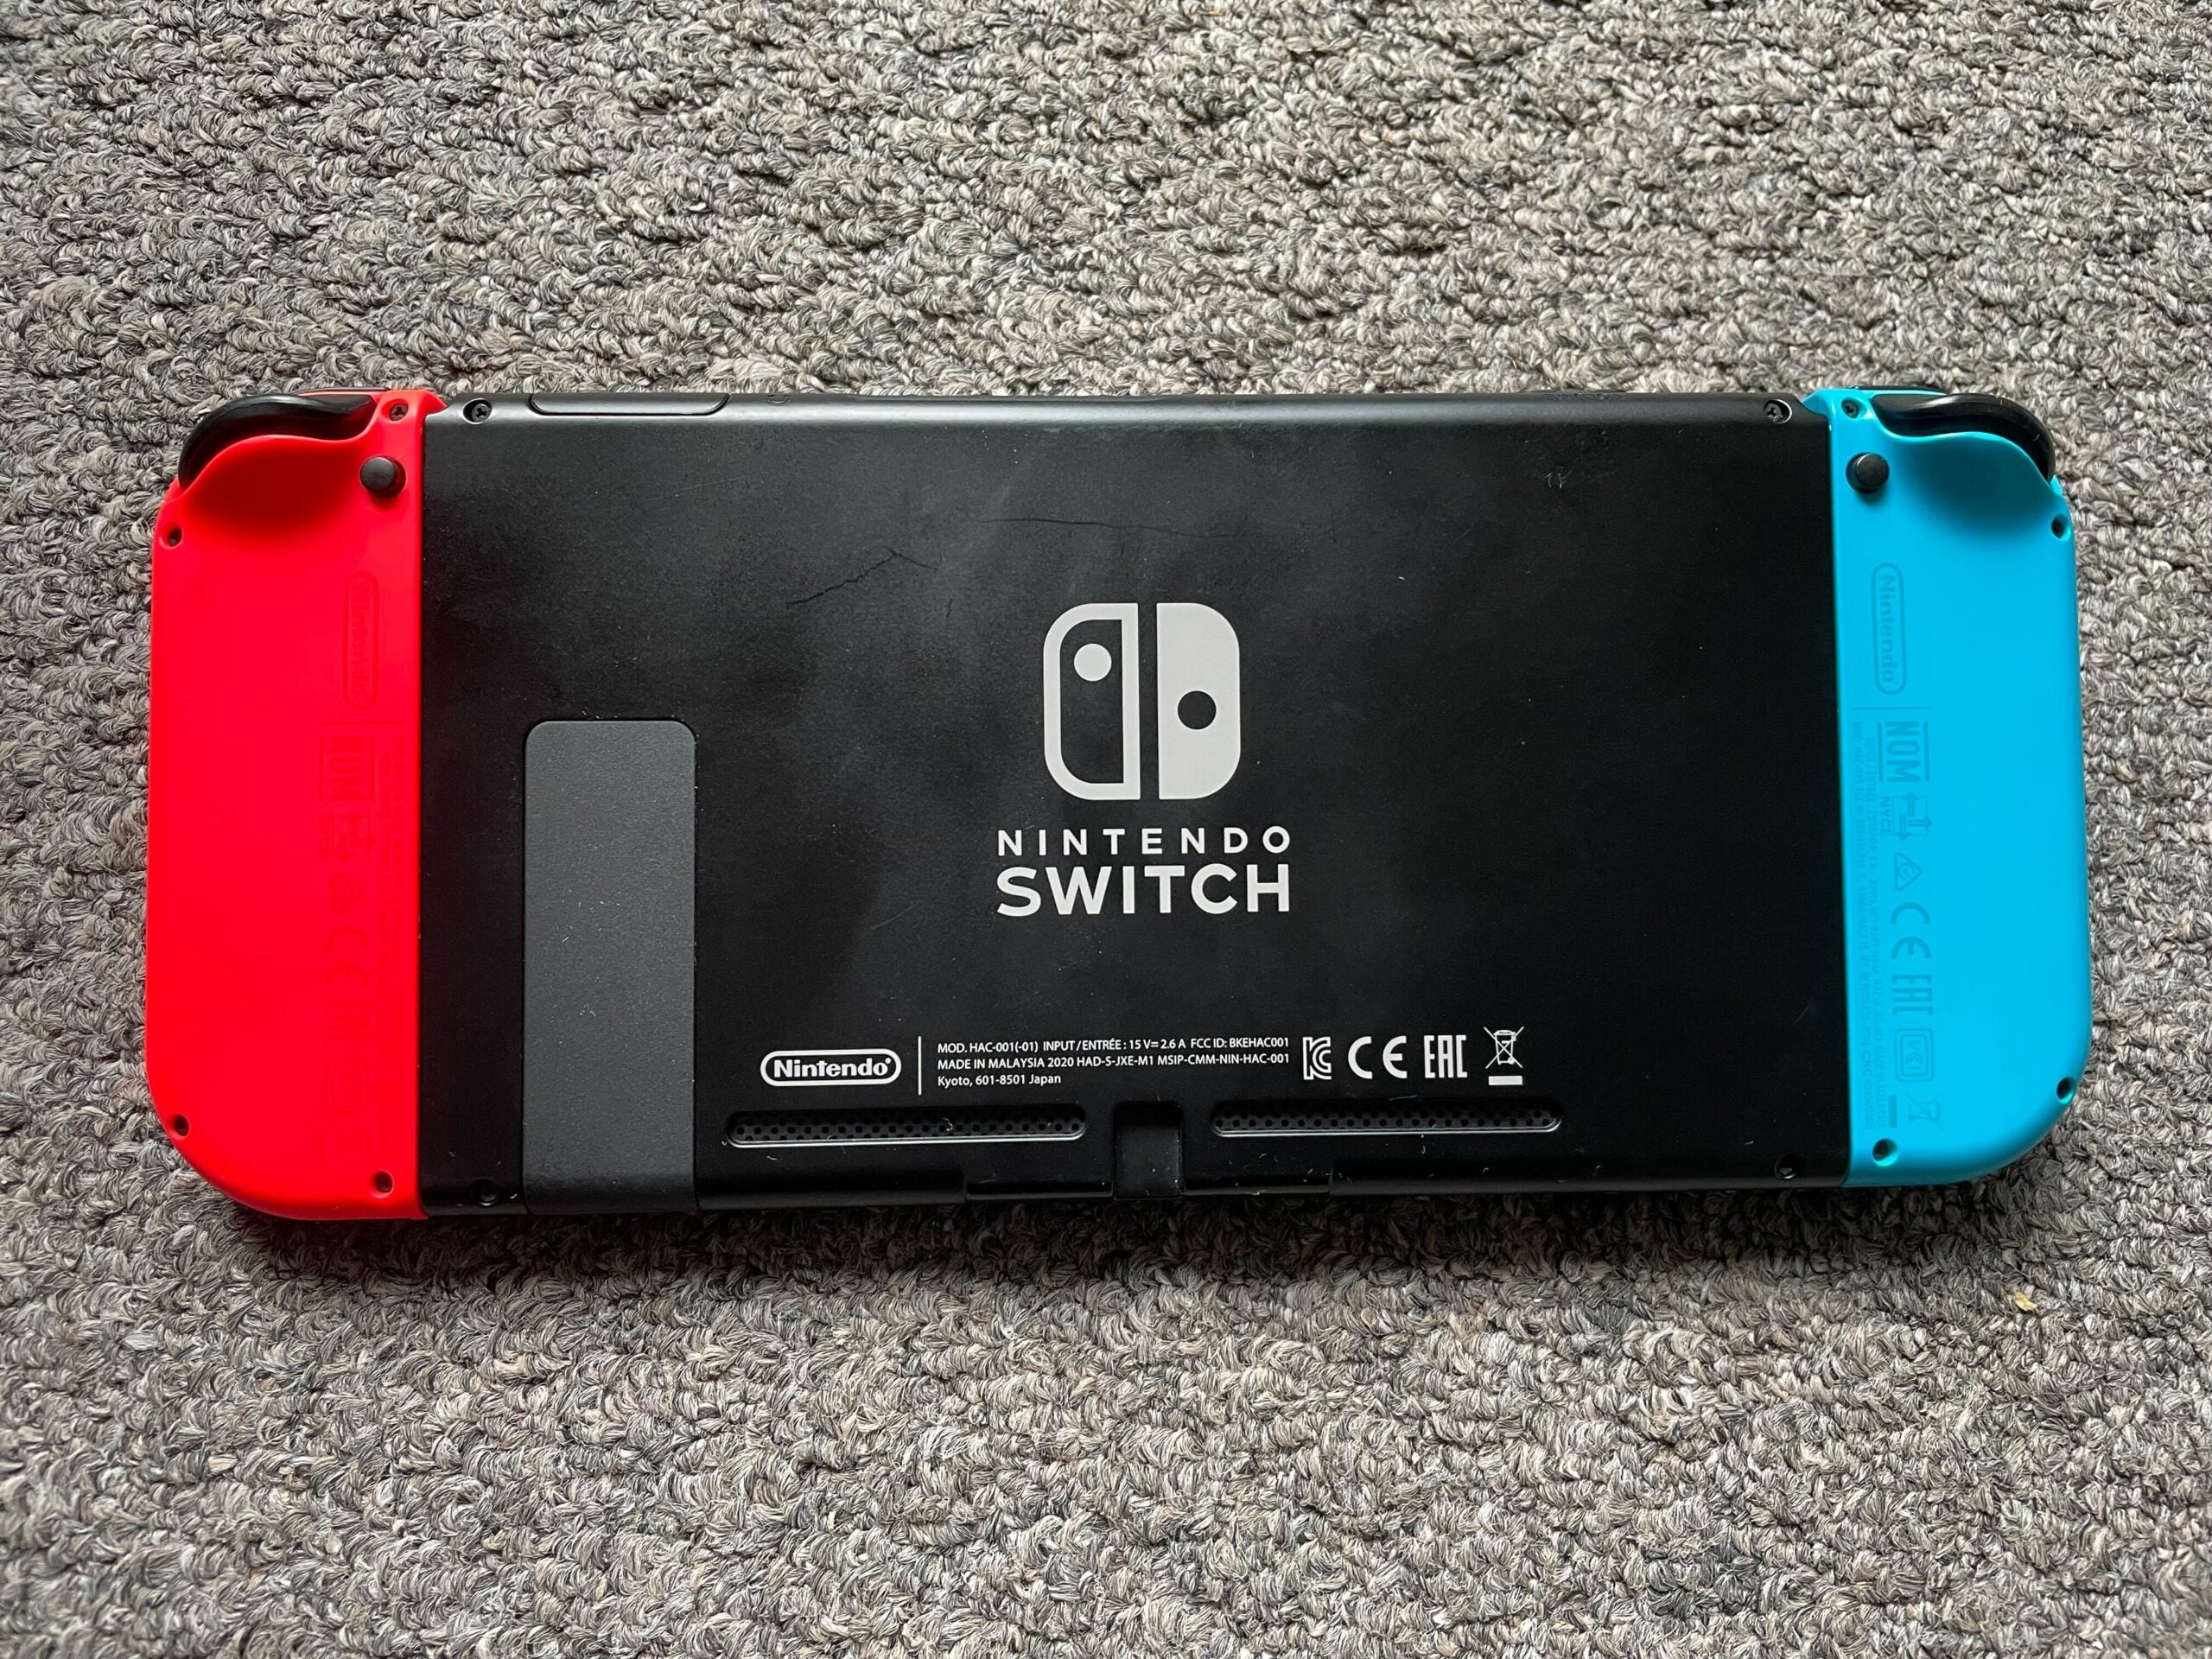 Back of the Nintendo Switch